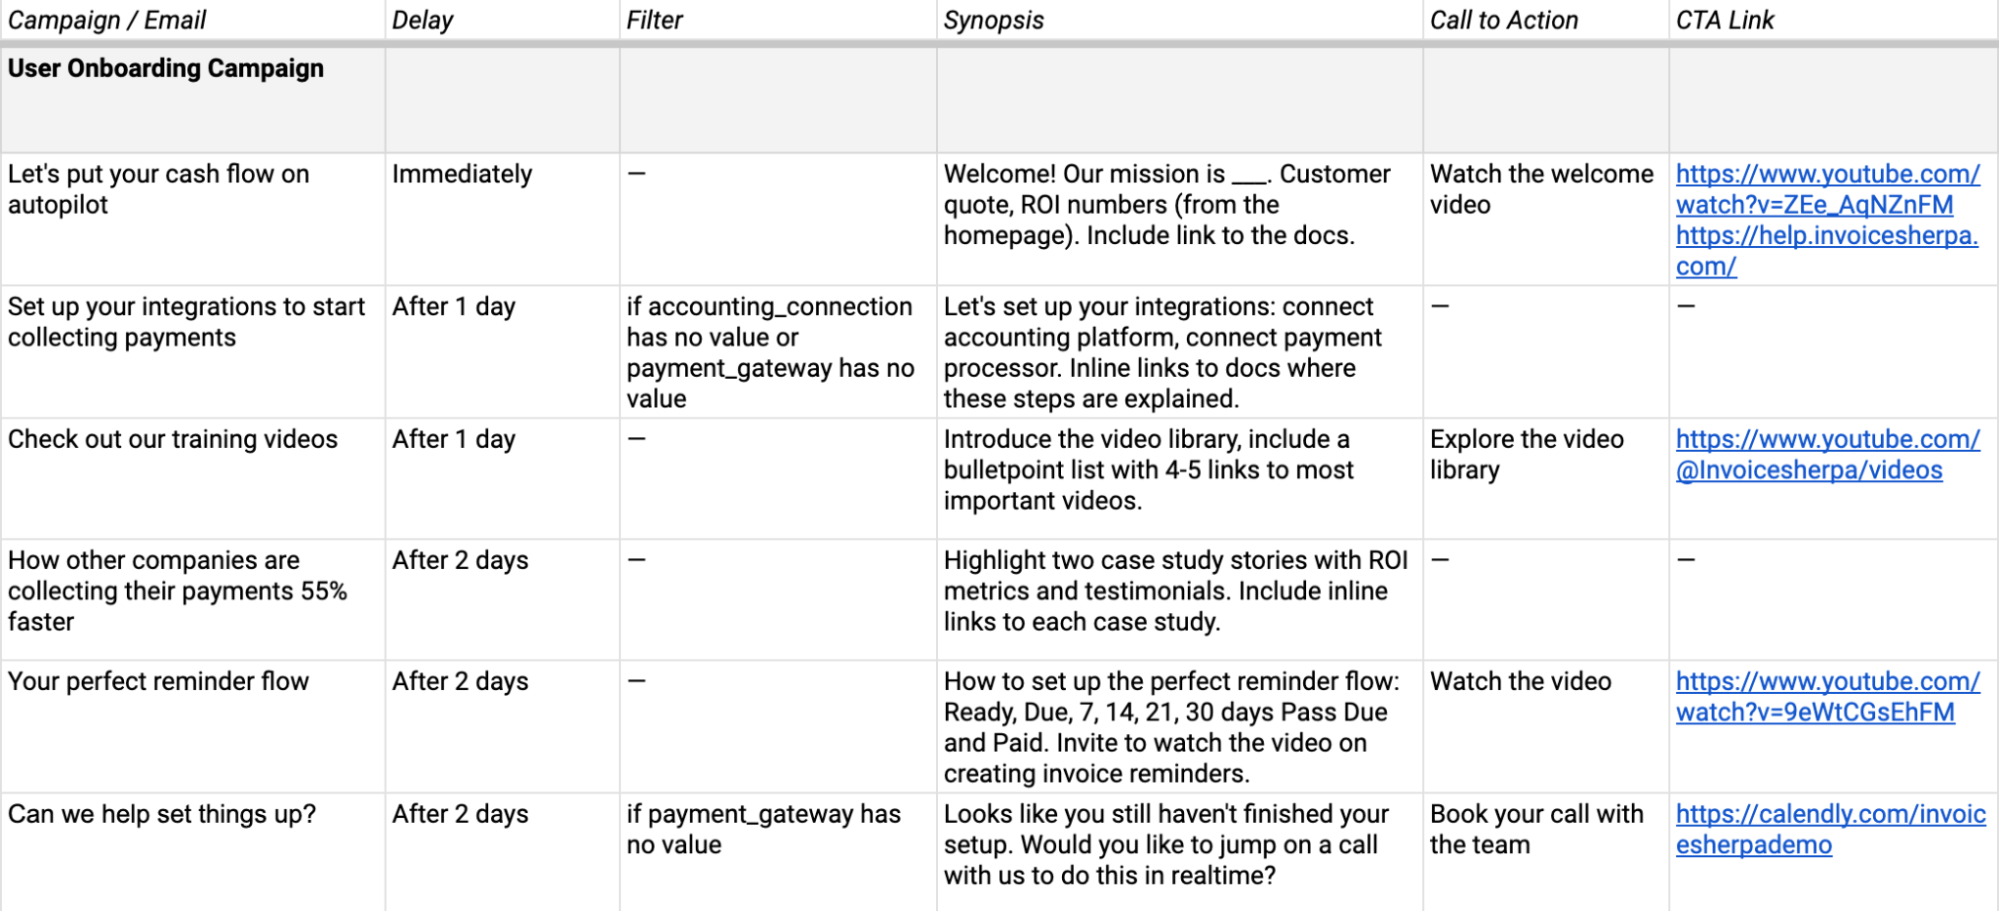 Atomic Emails: Screenshot of InvoiceSherpa's storyboard for their email campaign